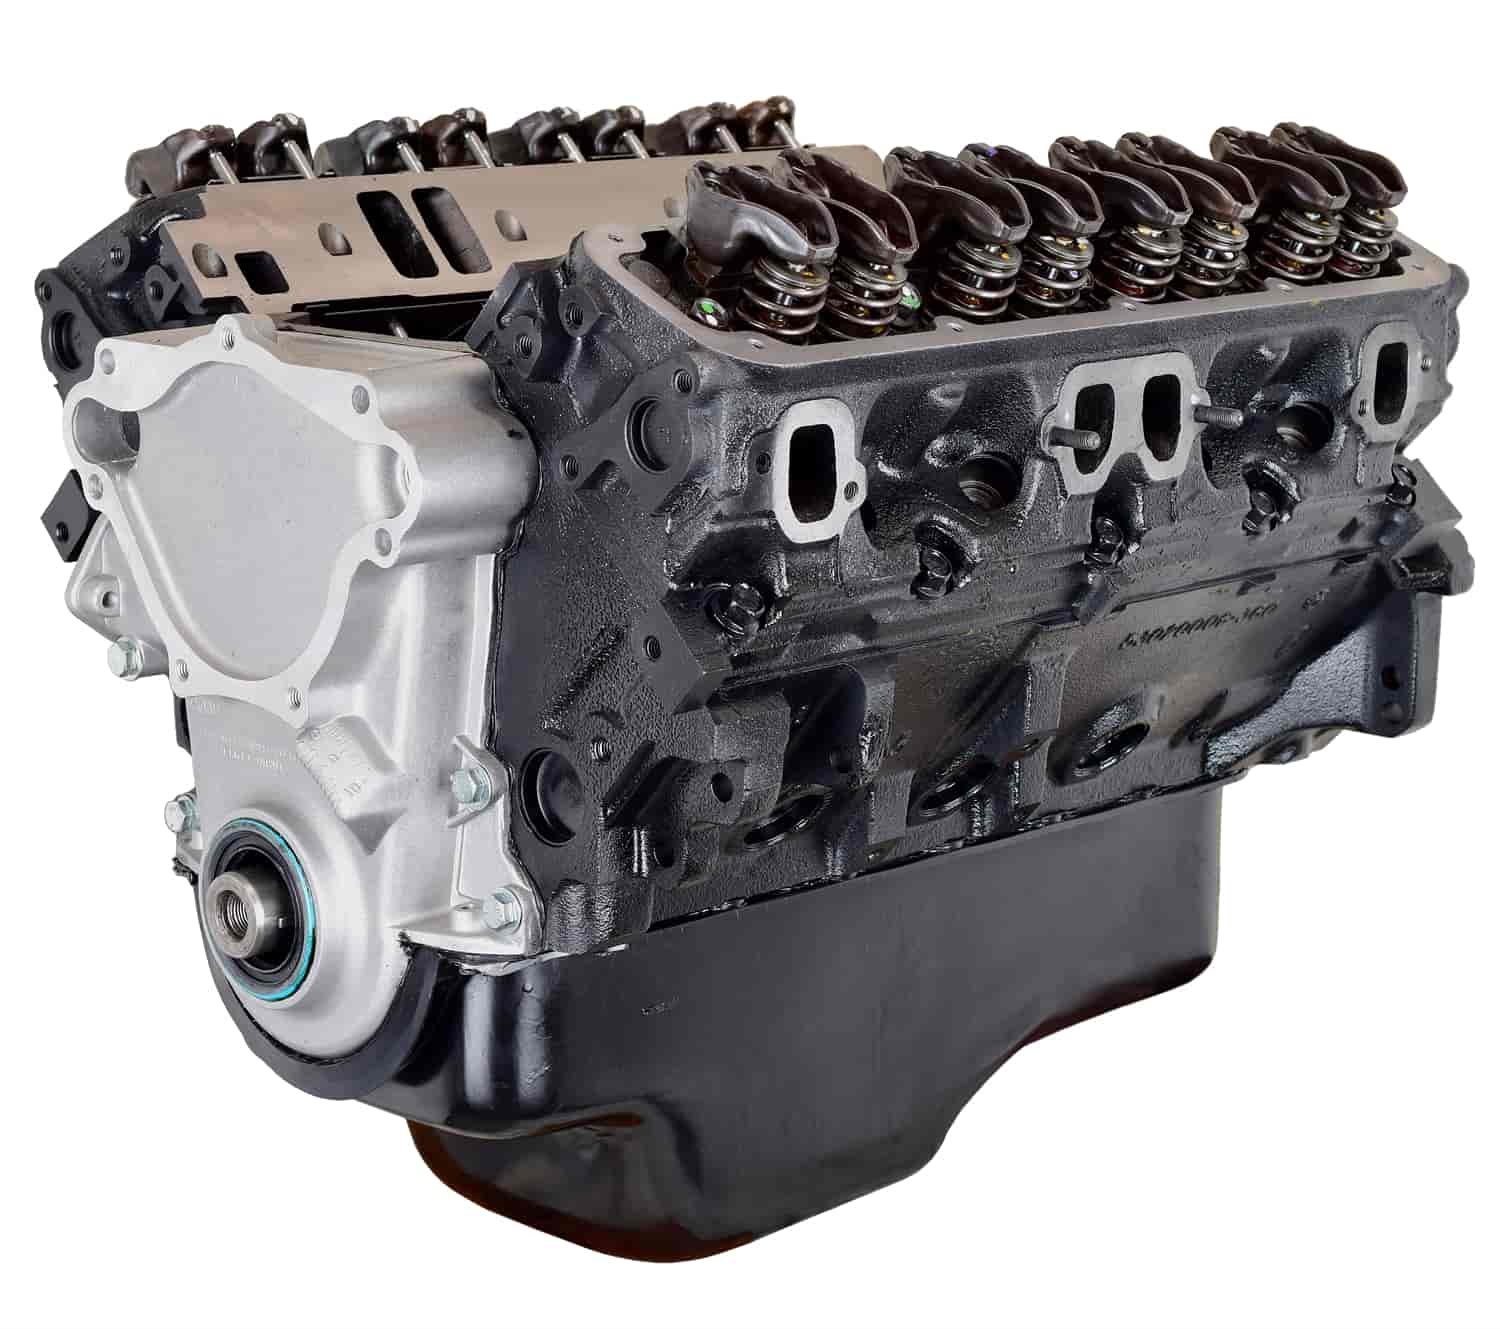 Chrysler Magnum 360ci Performance Crate Engine [310 HP/ 410 FT.-LBS.] | JEGS